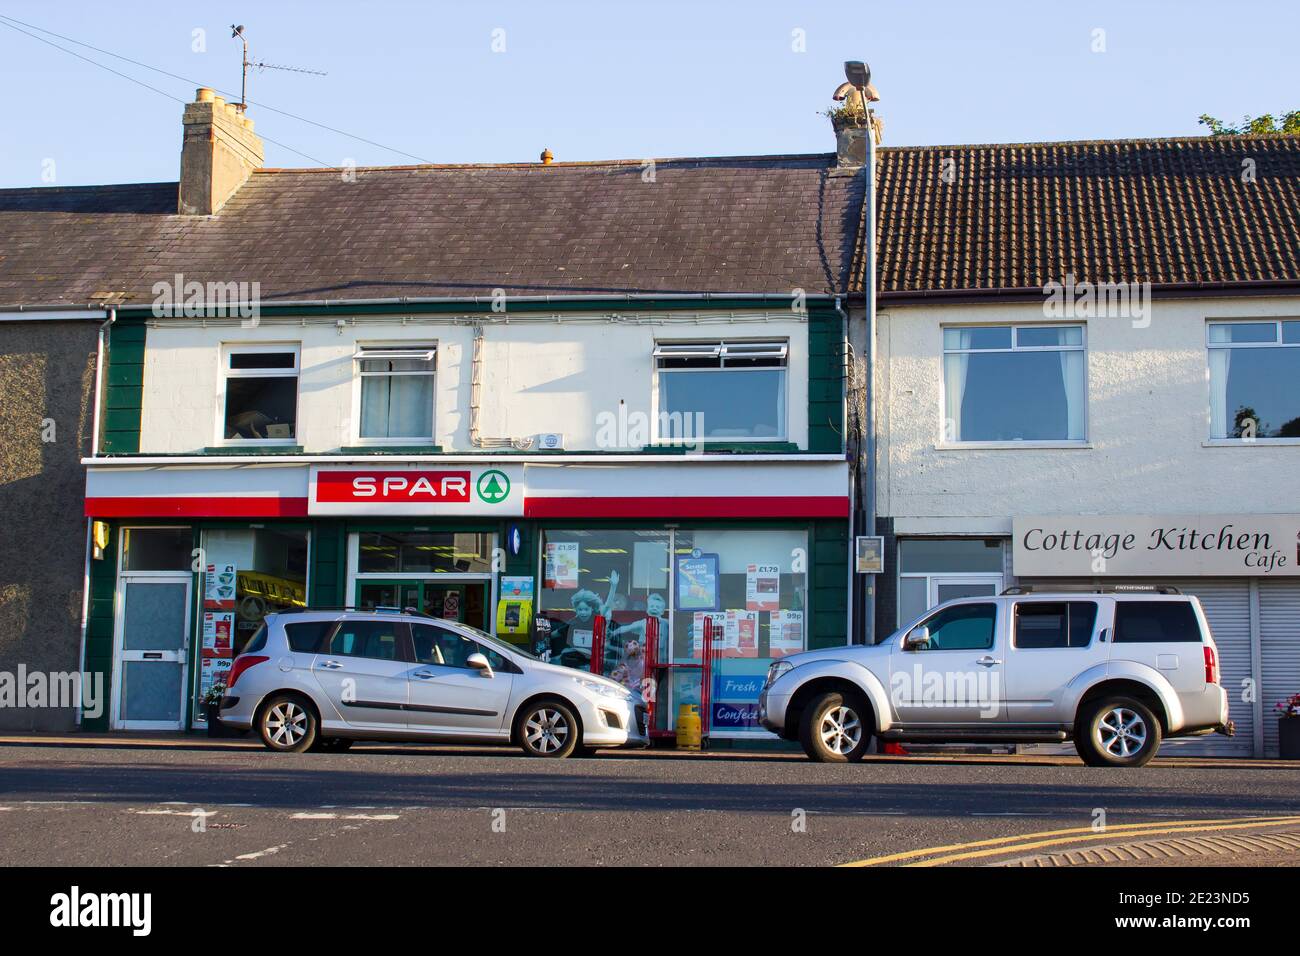 29 June 2018 A small Spar grocery store outlet open for business in Groomsport County Down while the local cafe remains closed on a warm summer evenin Stock Photo